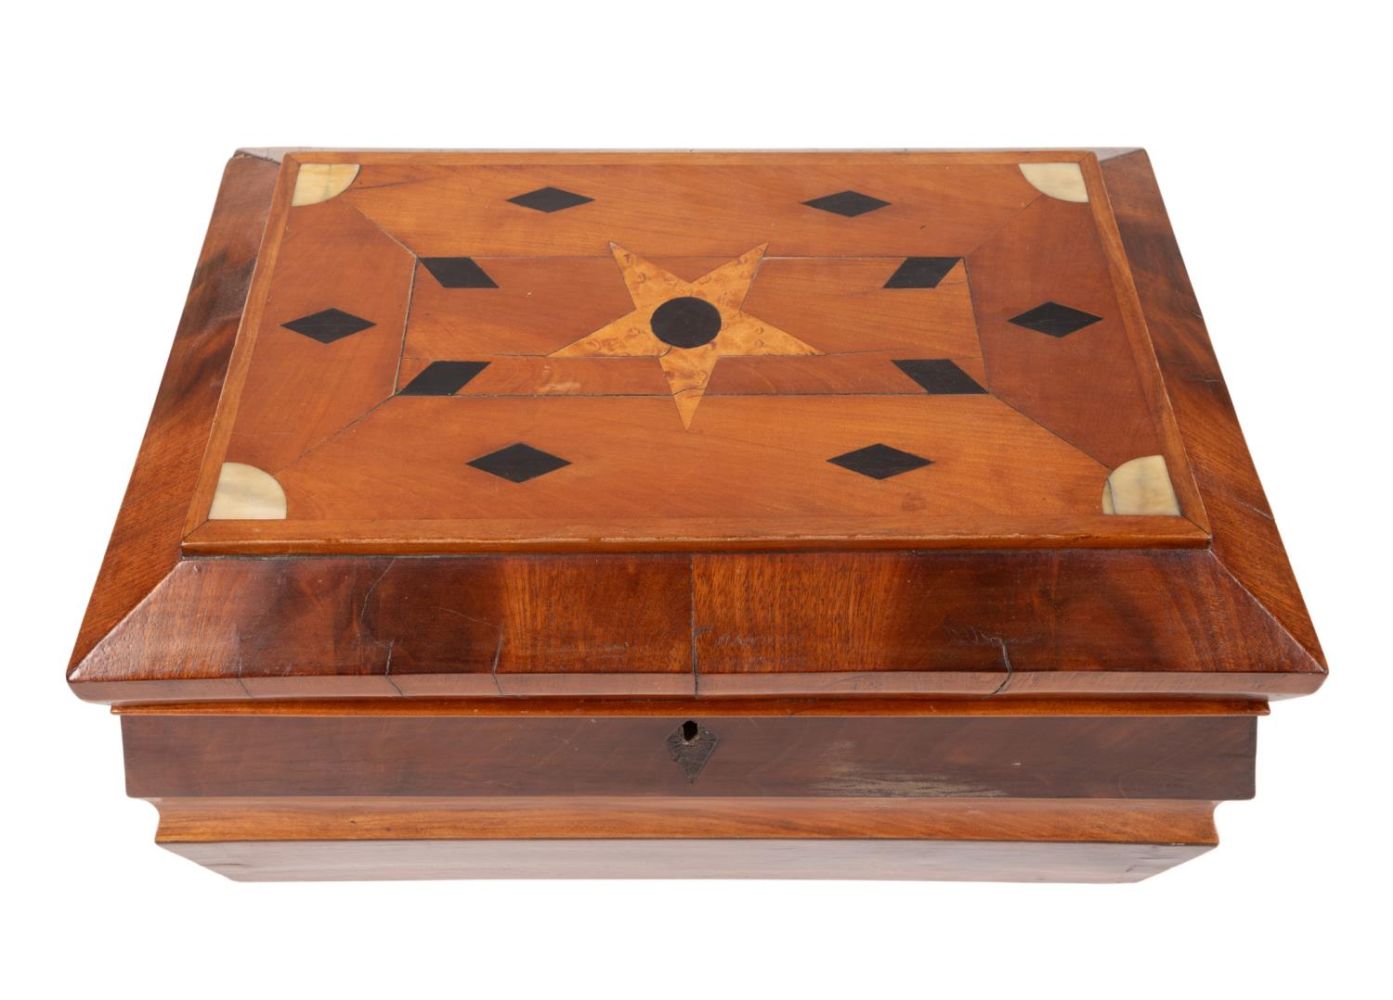 19TH C. AMERICAN PARQUETRY INLAID